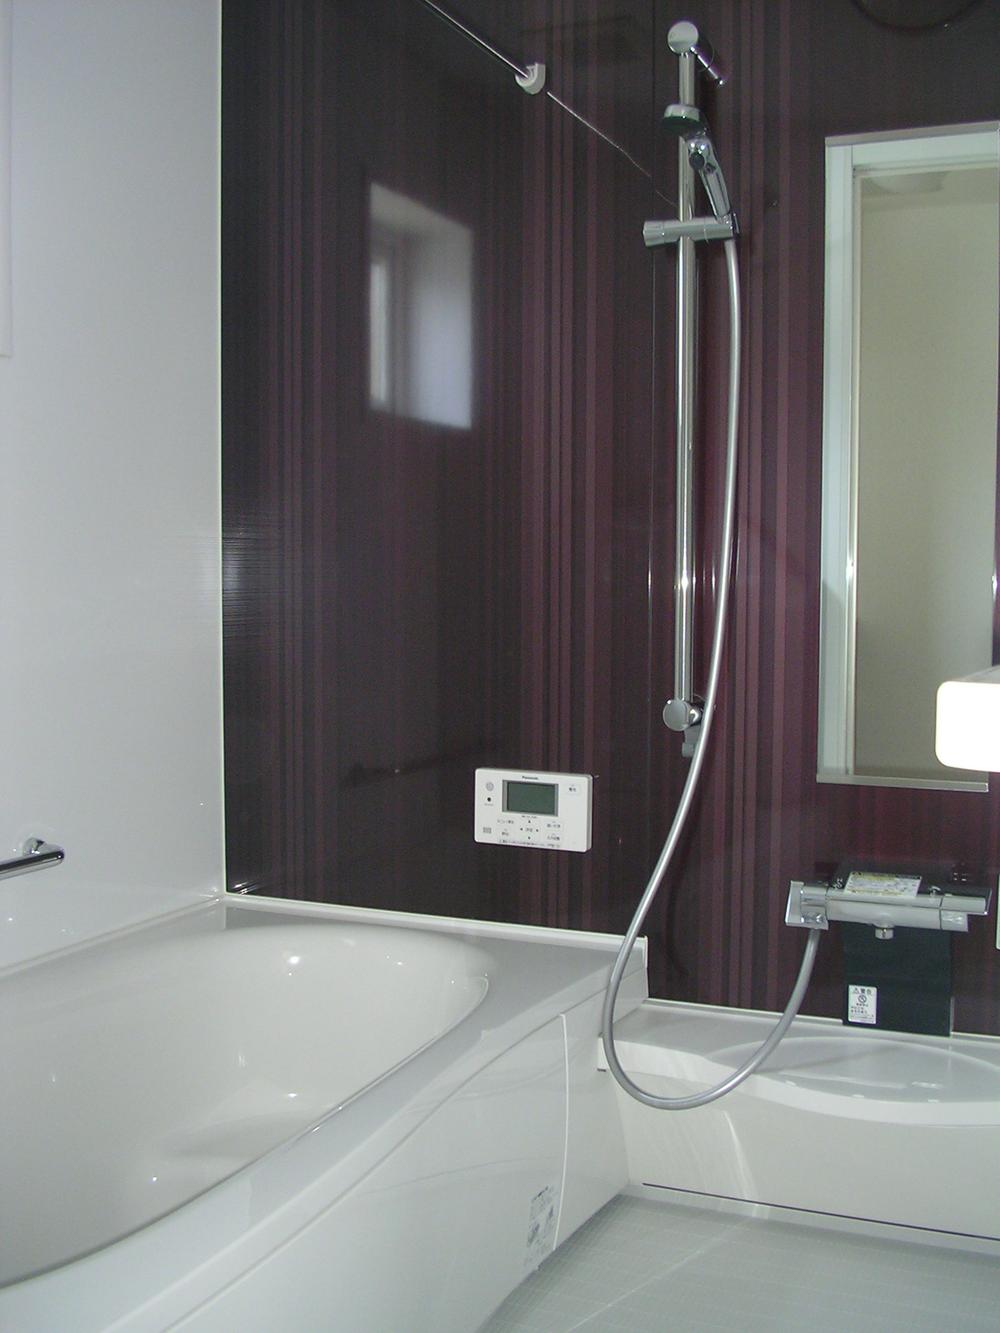 Bathroom. Room (May 2013) panel of shooting calm atmosphere has divided one side clad. It is a sitz bath tub of 1 pyeong type.